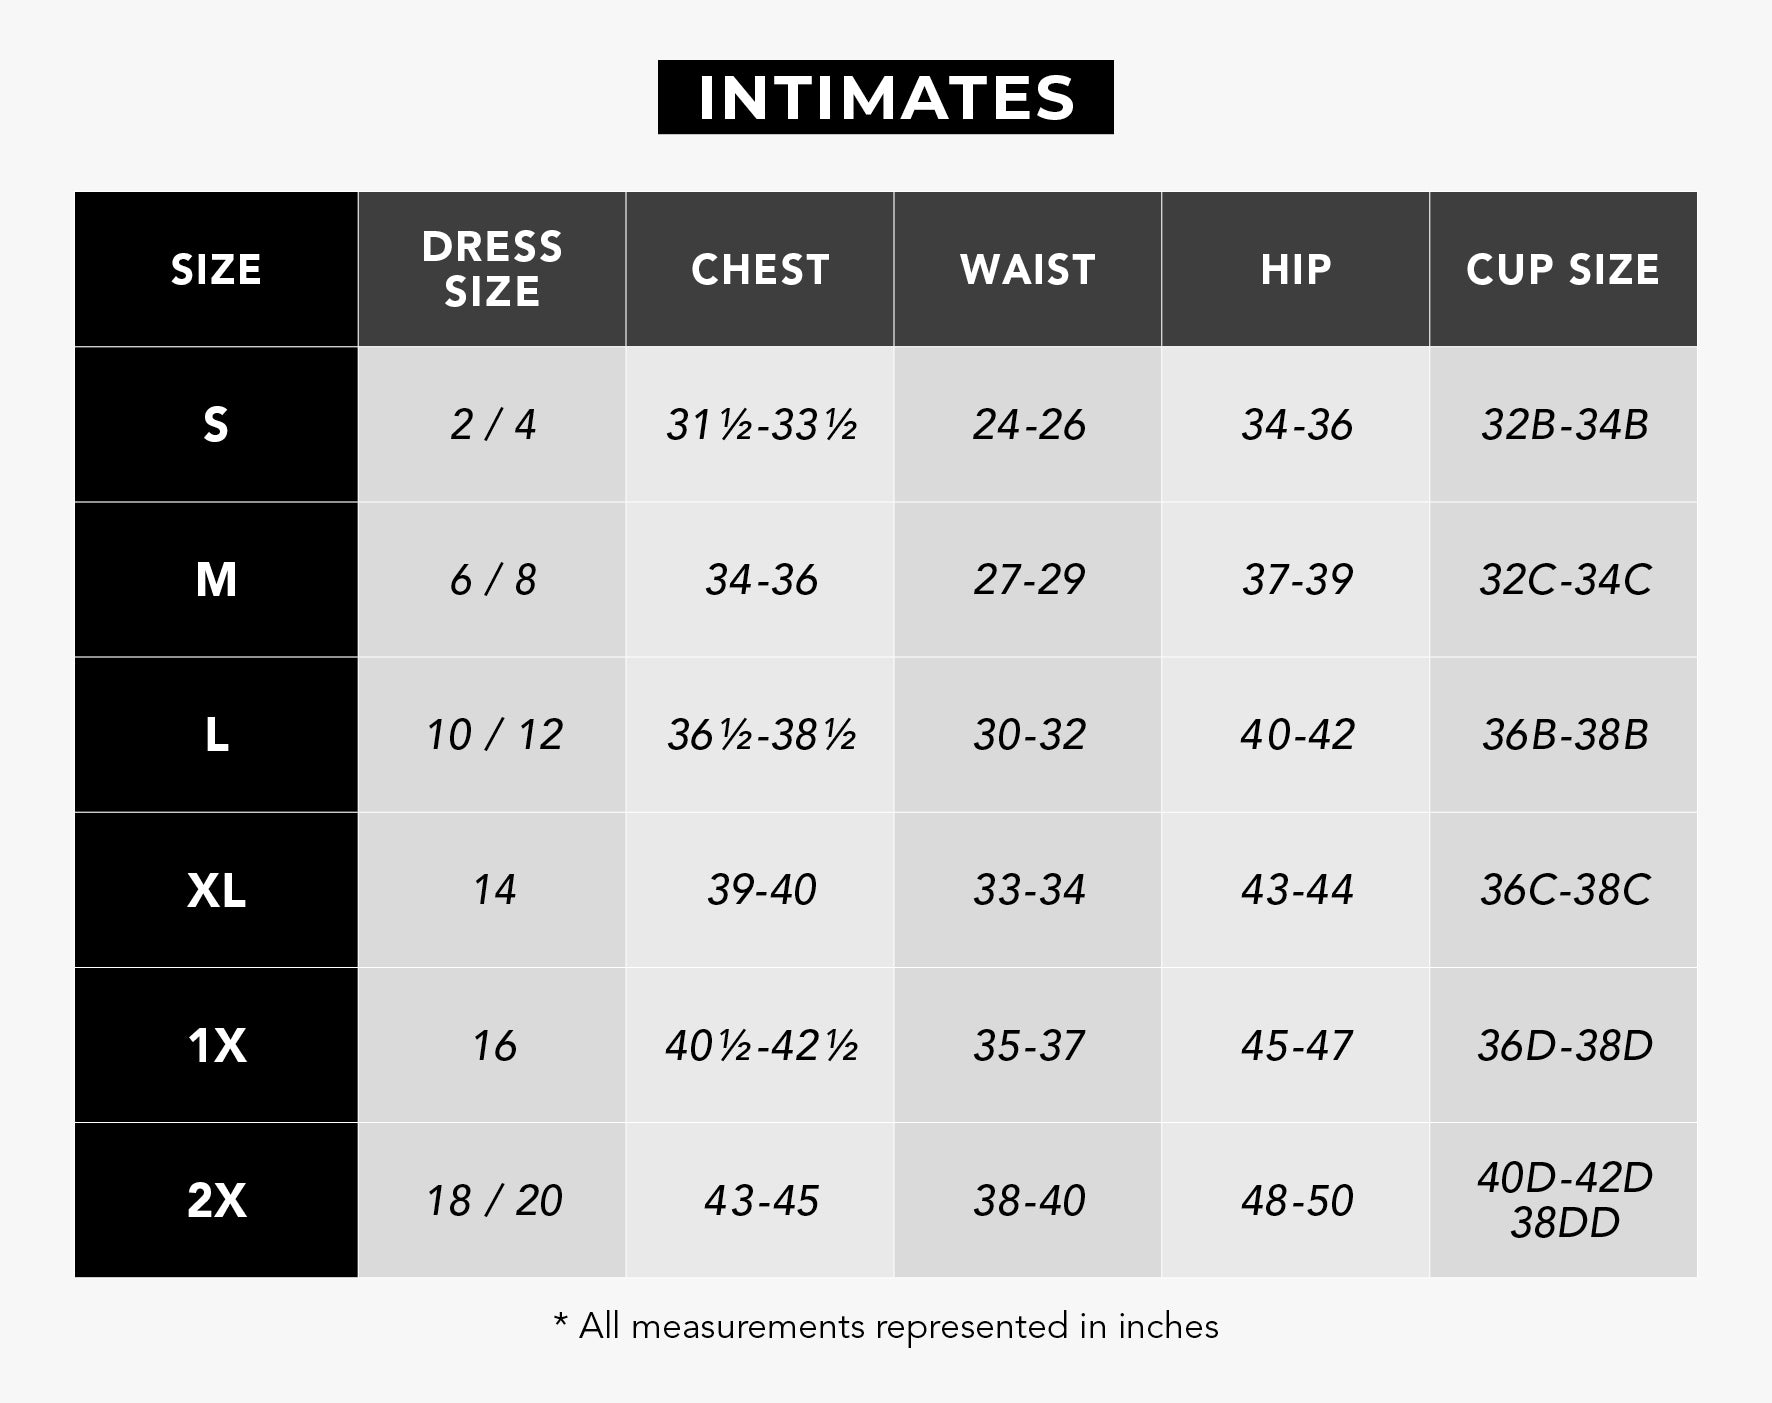 Guide to Women's Fit and Sizing